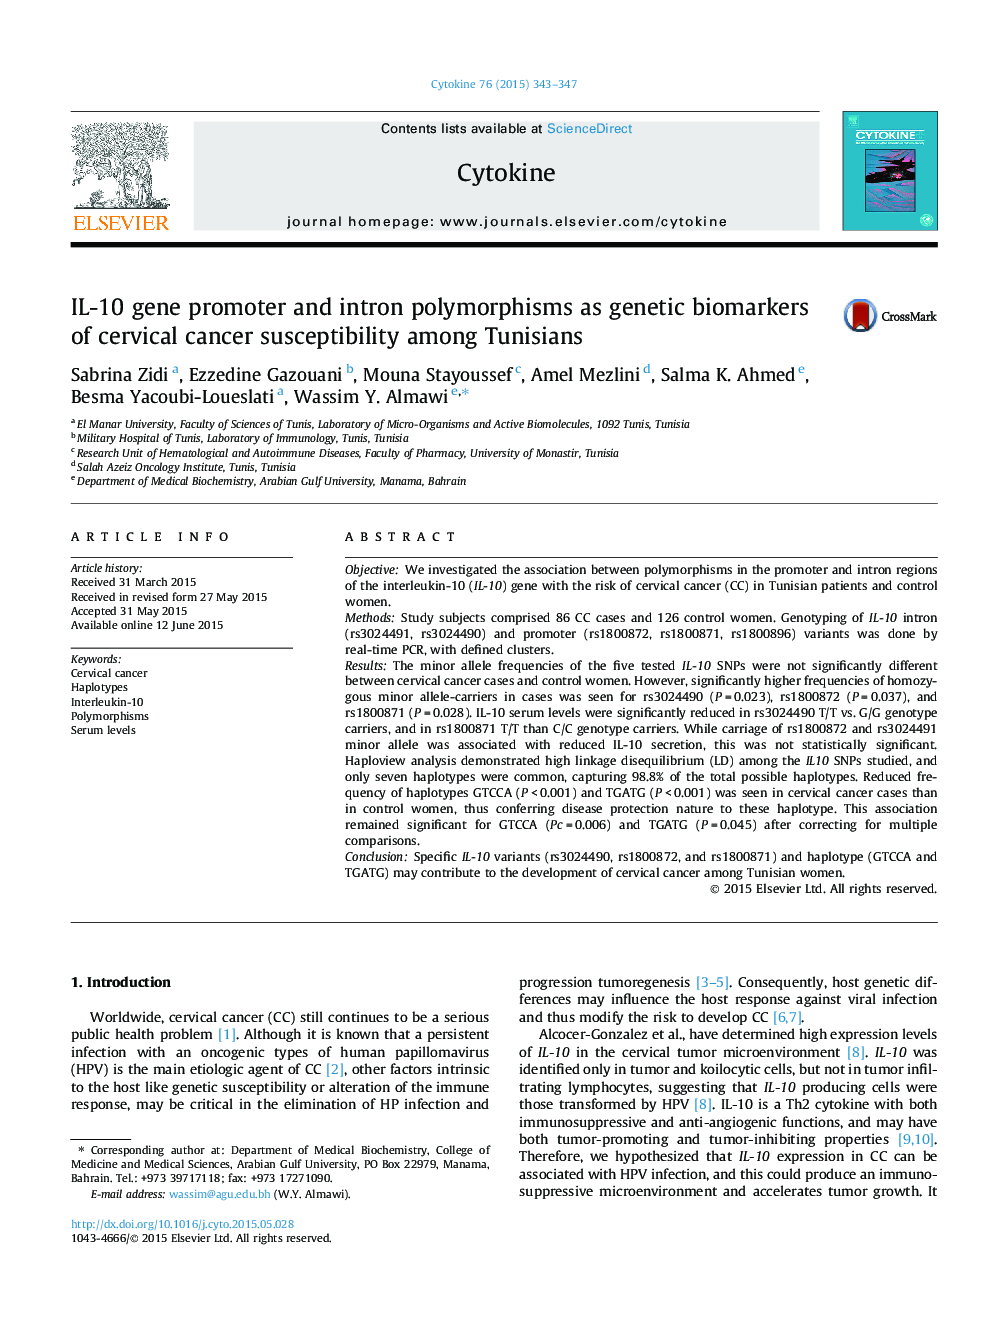 IL-10 gene promoter and intron polymorphisms as genetic biomarkers of cervical cancer susceptibility among Tunisians